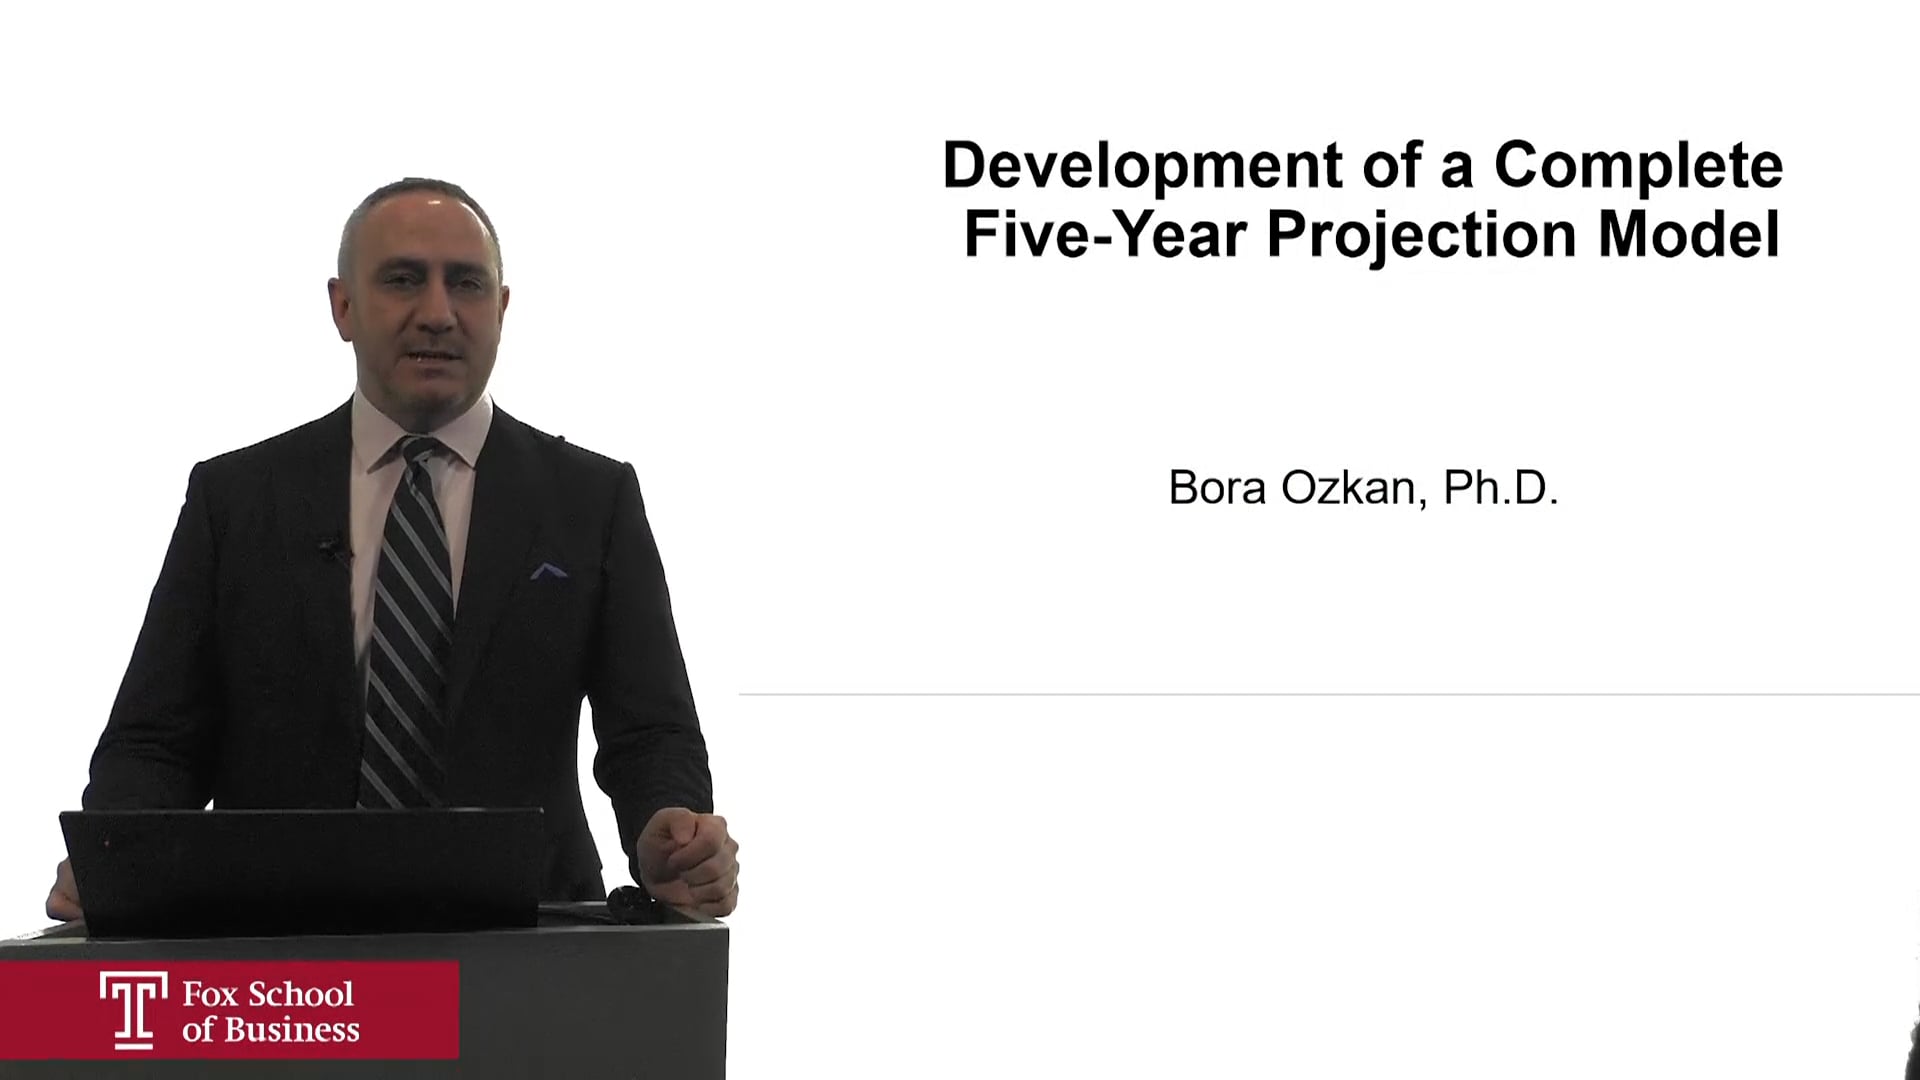 Development of a Complete Five-Year Projection Model